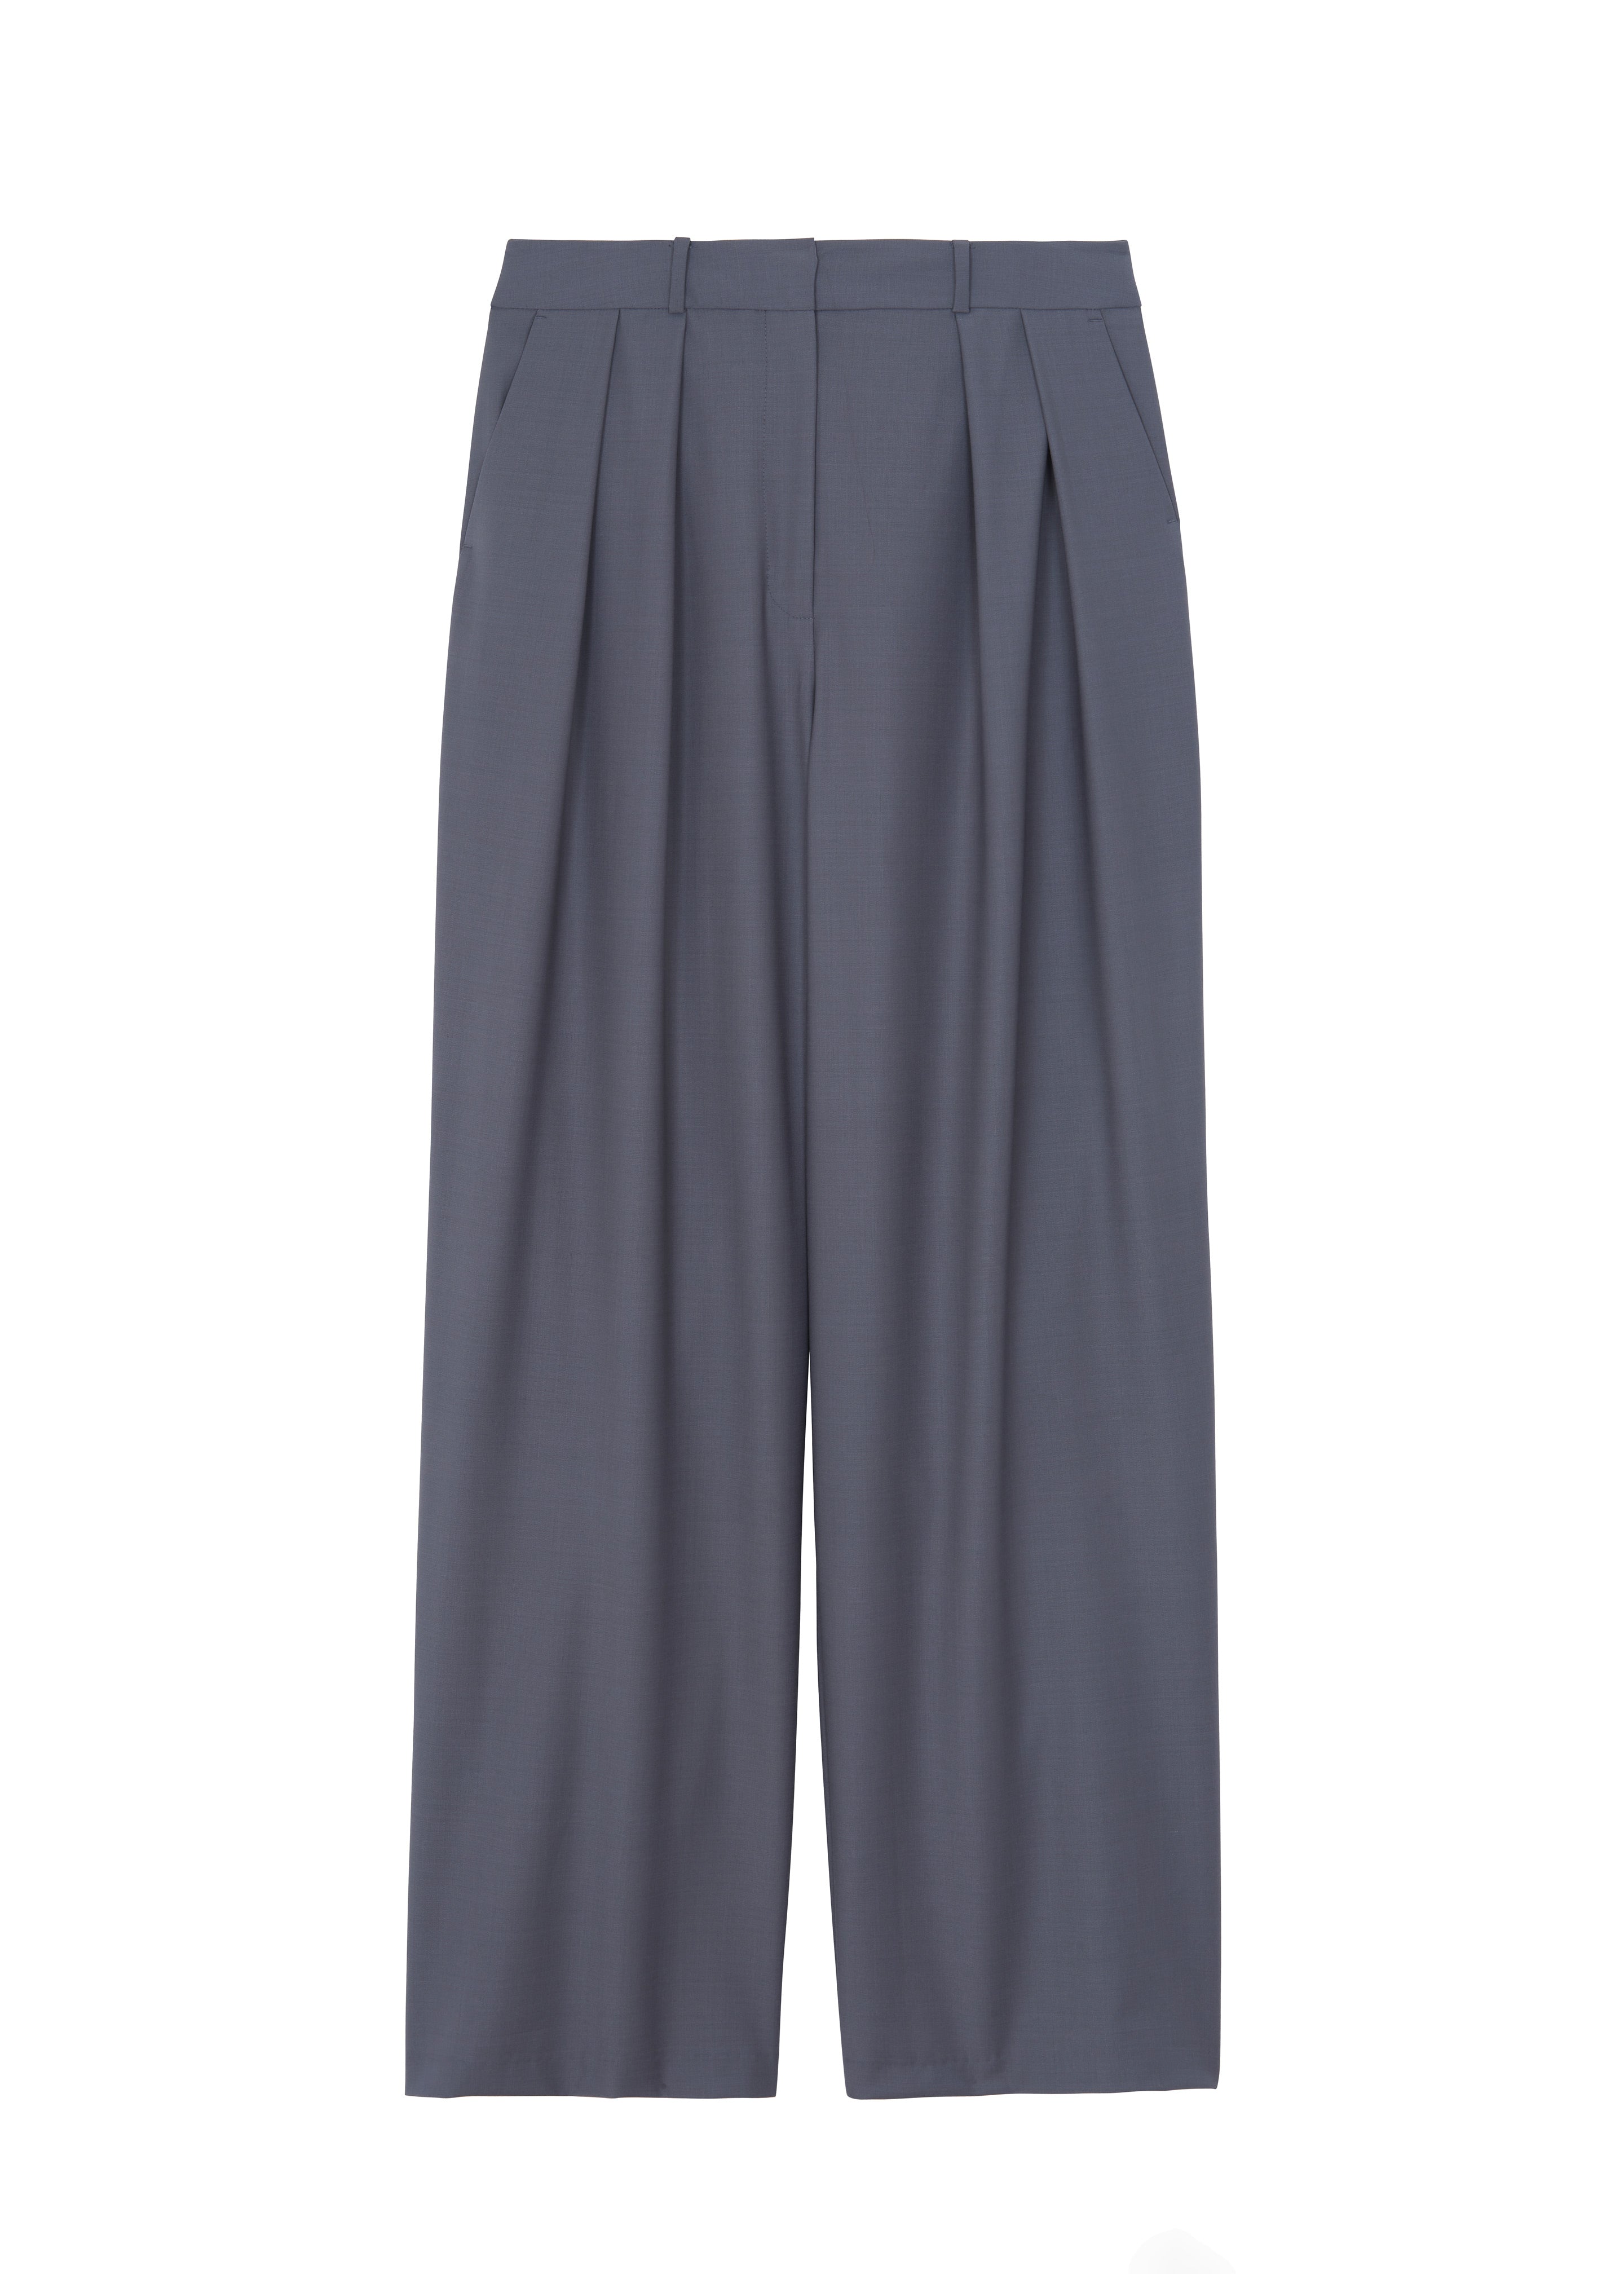 Ripley Pleated Trousers - Grey - 15